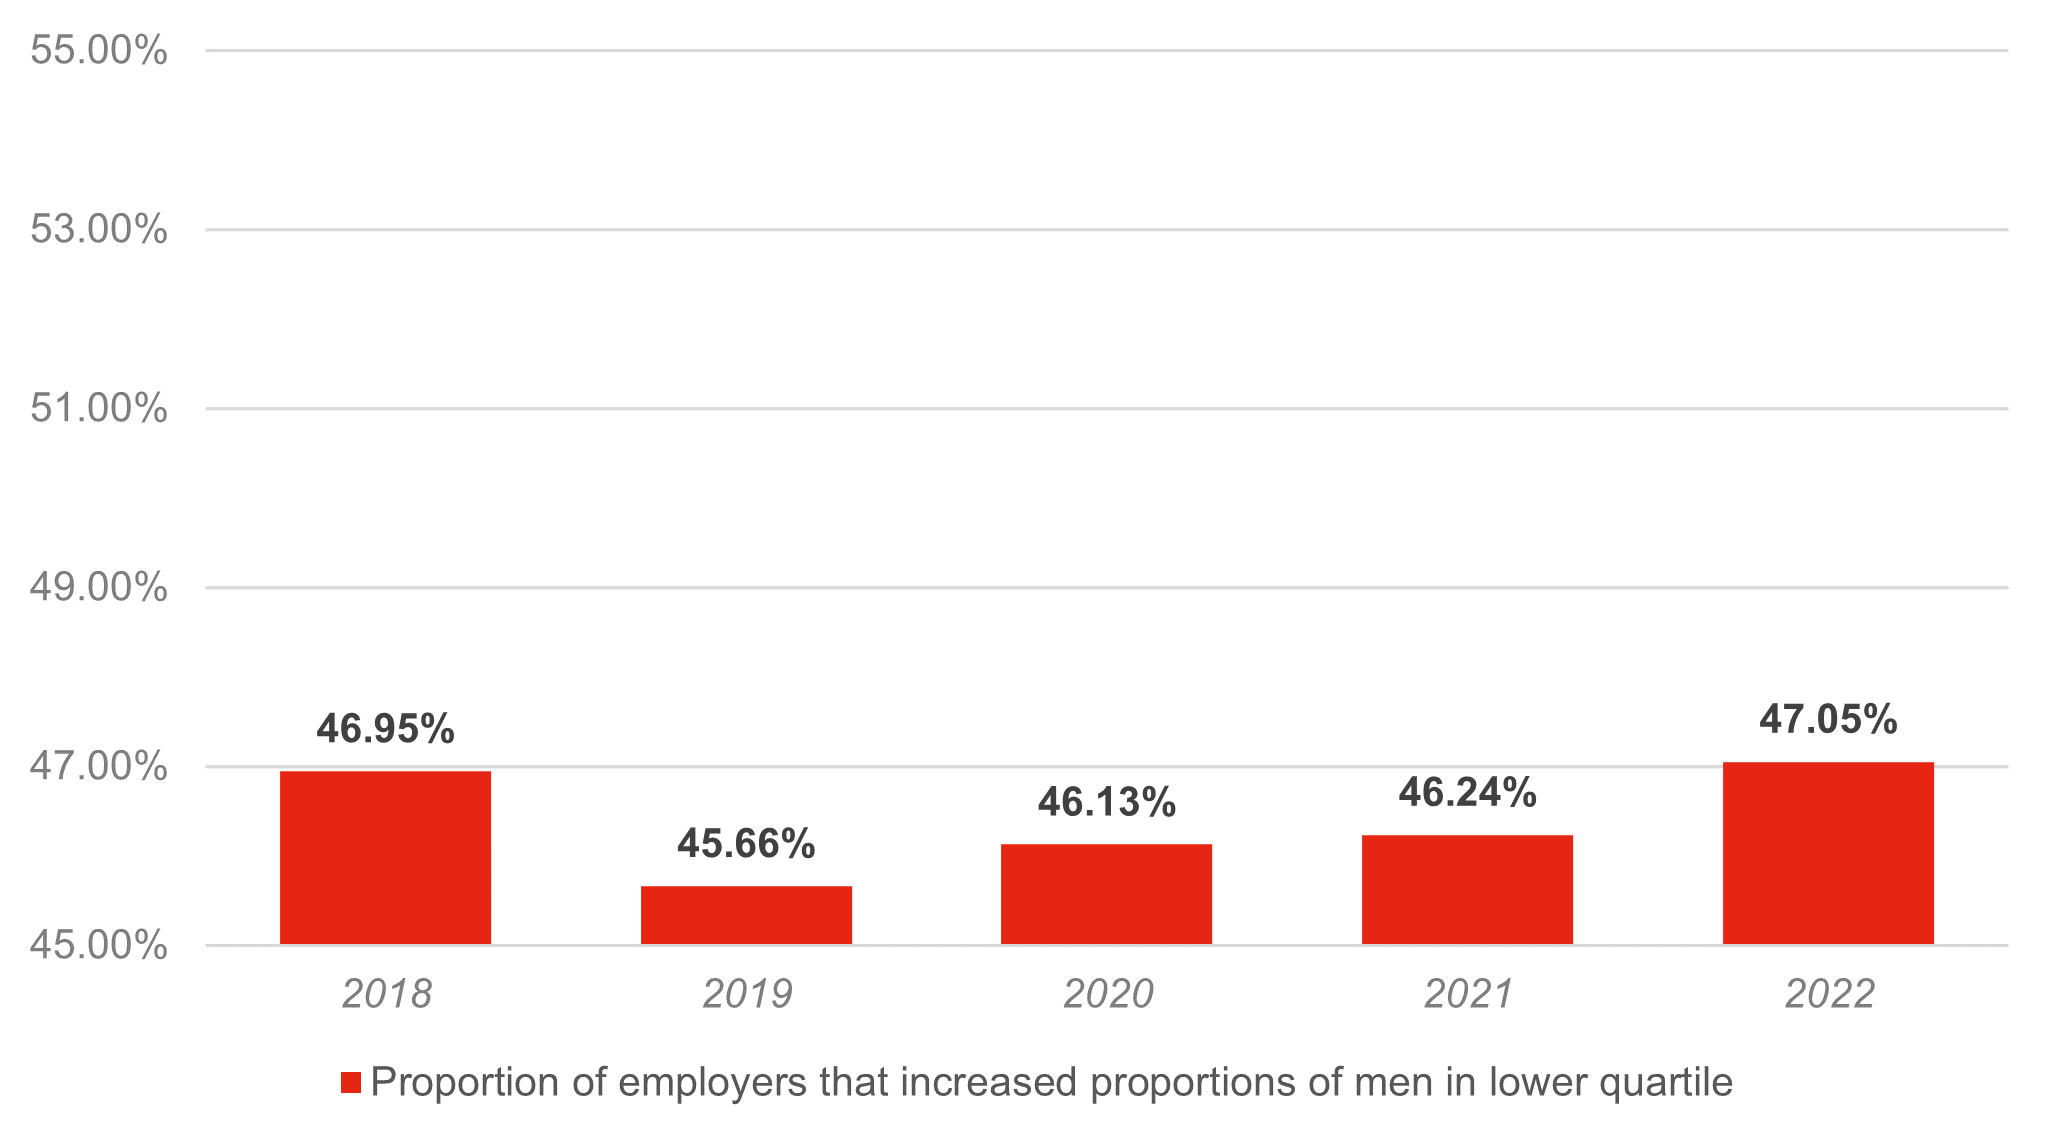 Proportion of employers that increased men in lower quartile